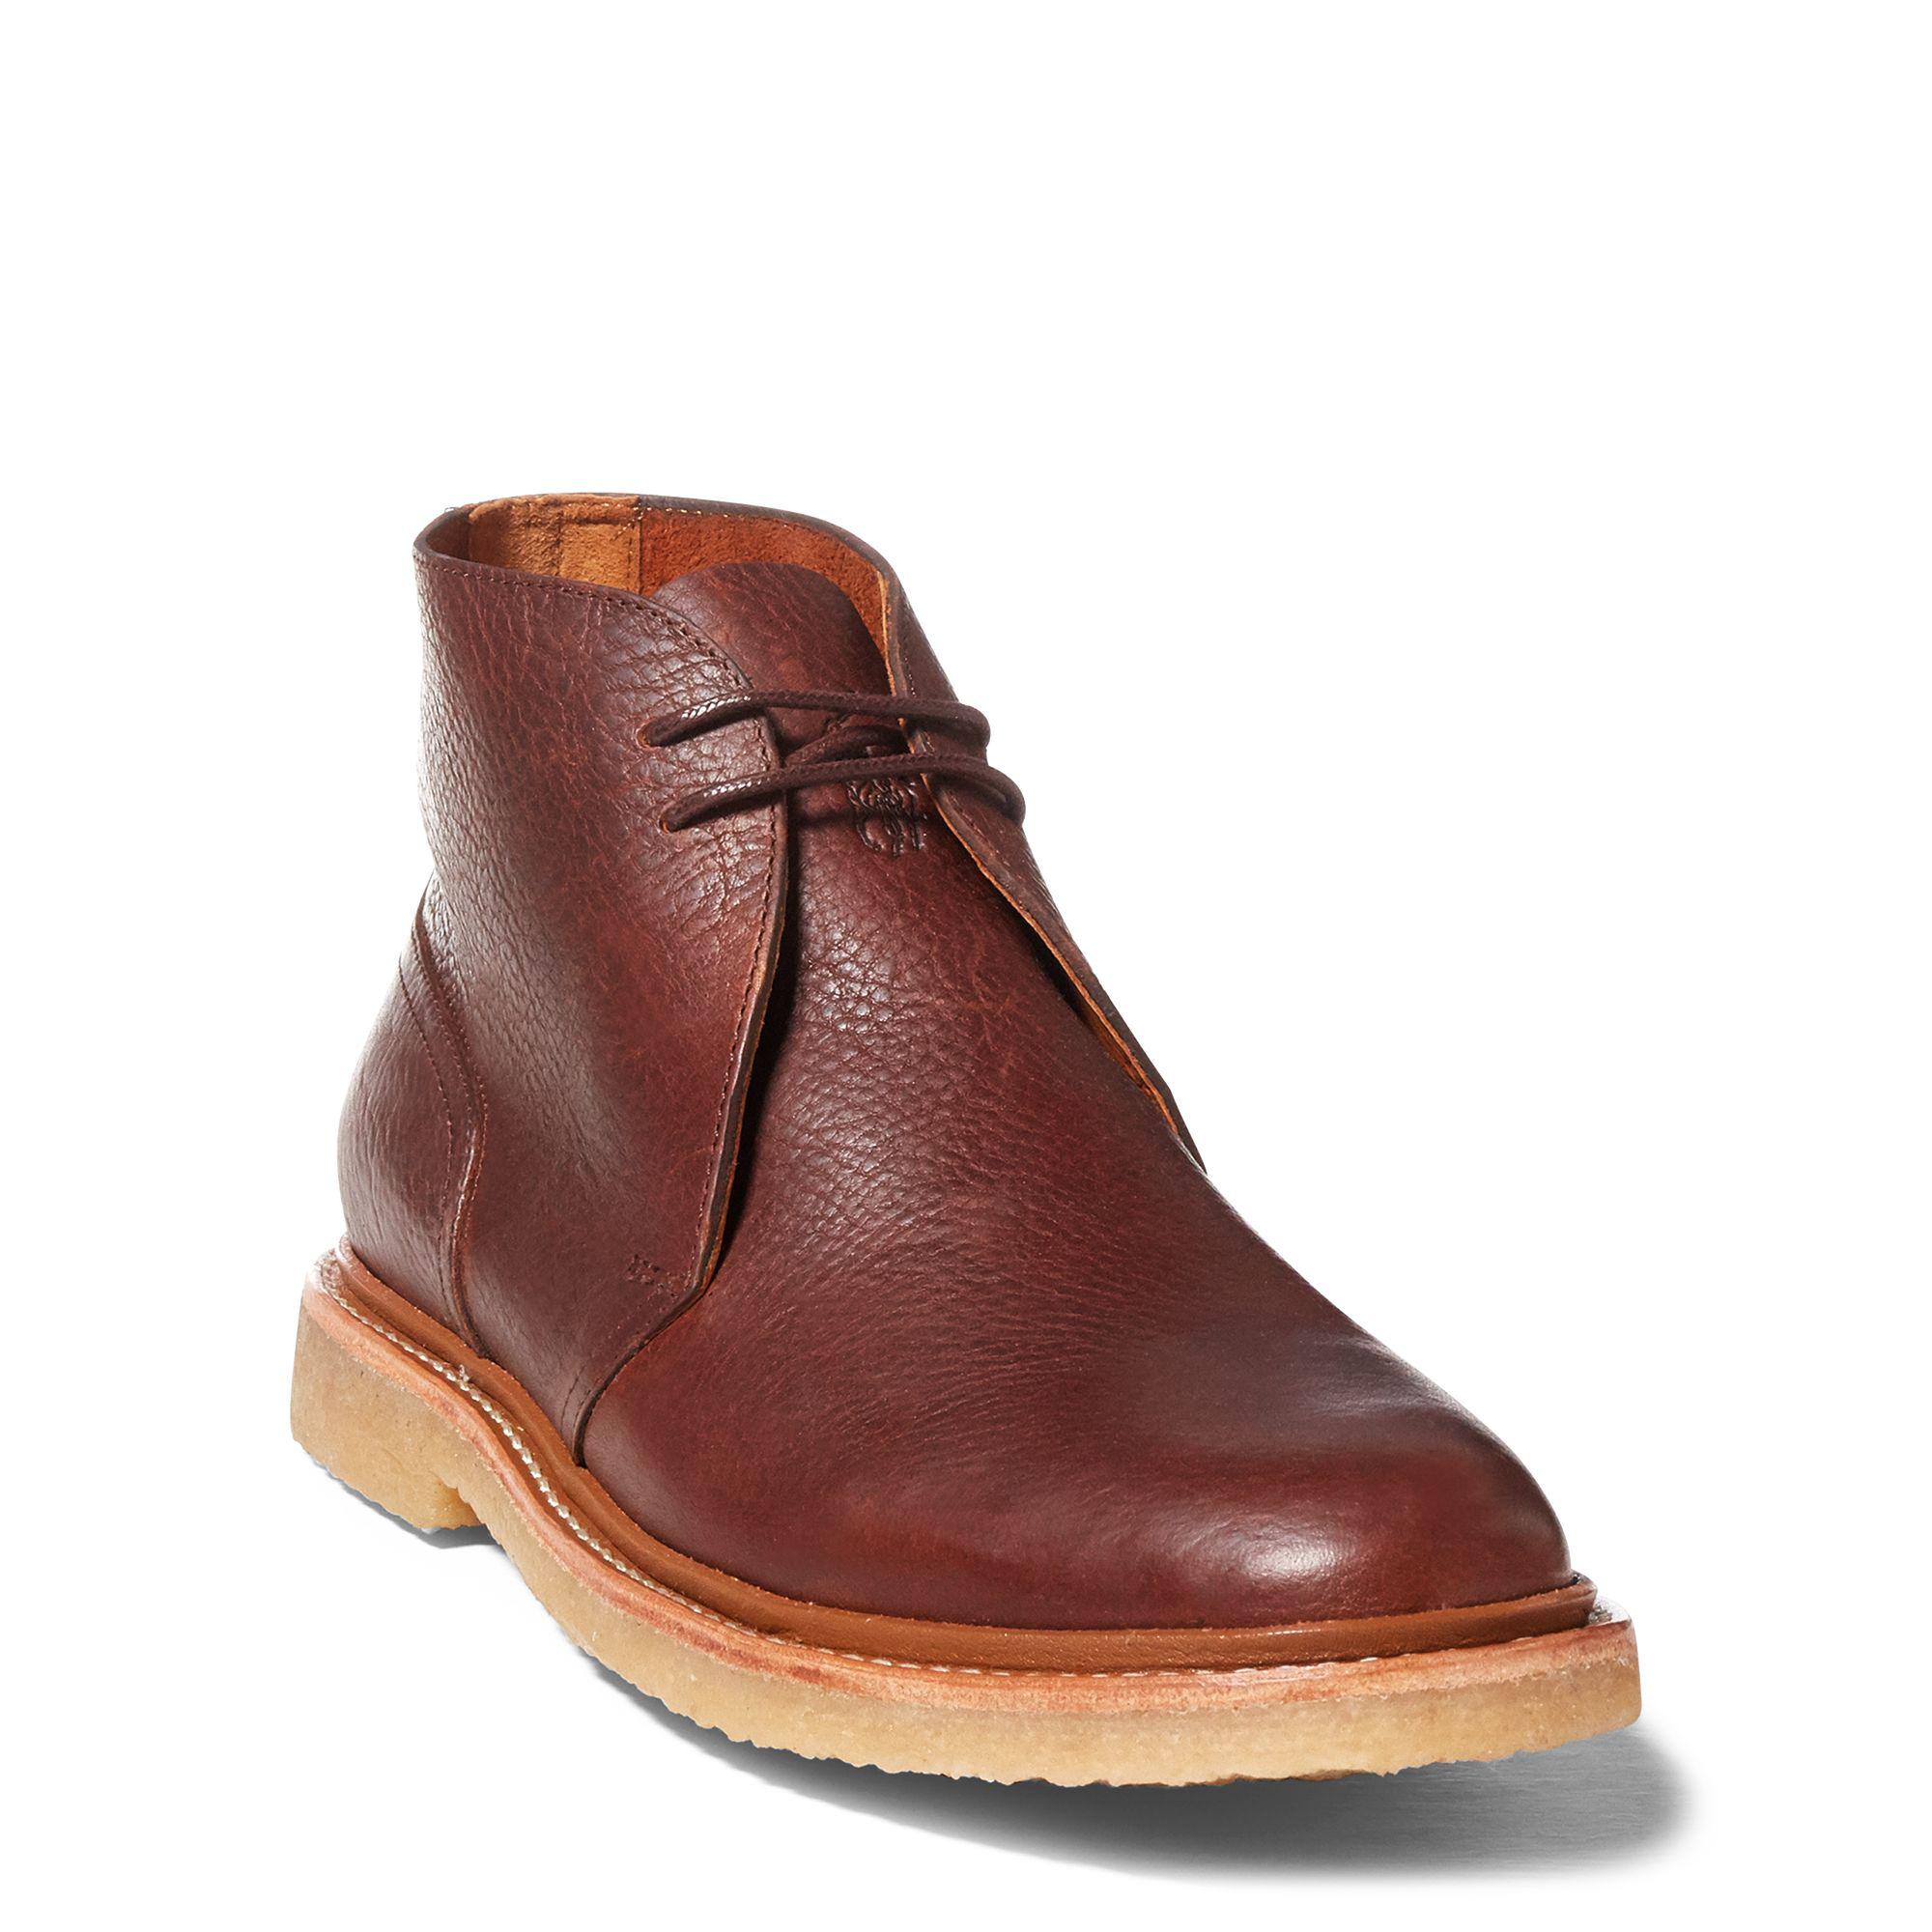 Polo Ralph Lauren Karlyle Leather Chukka Boot in Brown for Men - Lyst